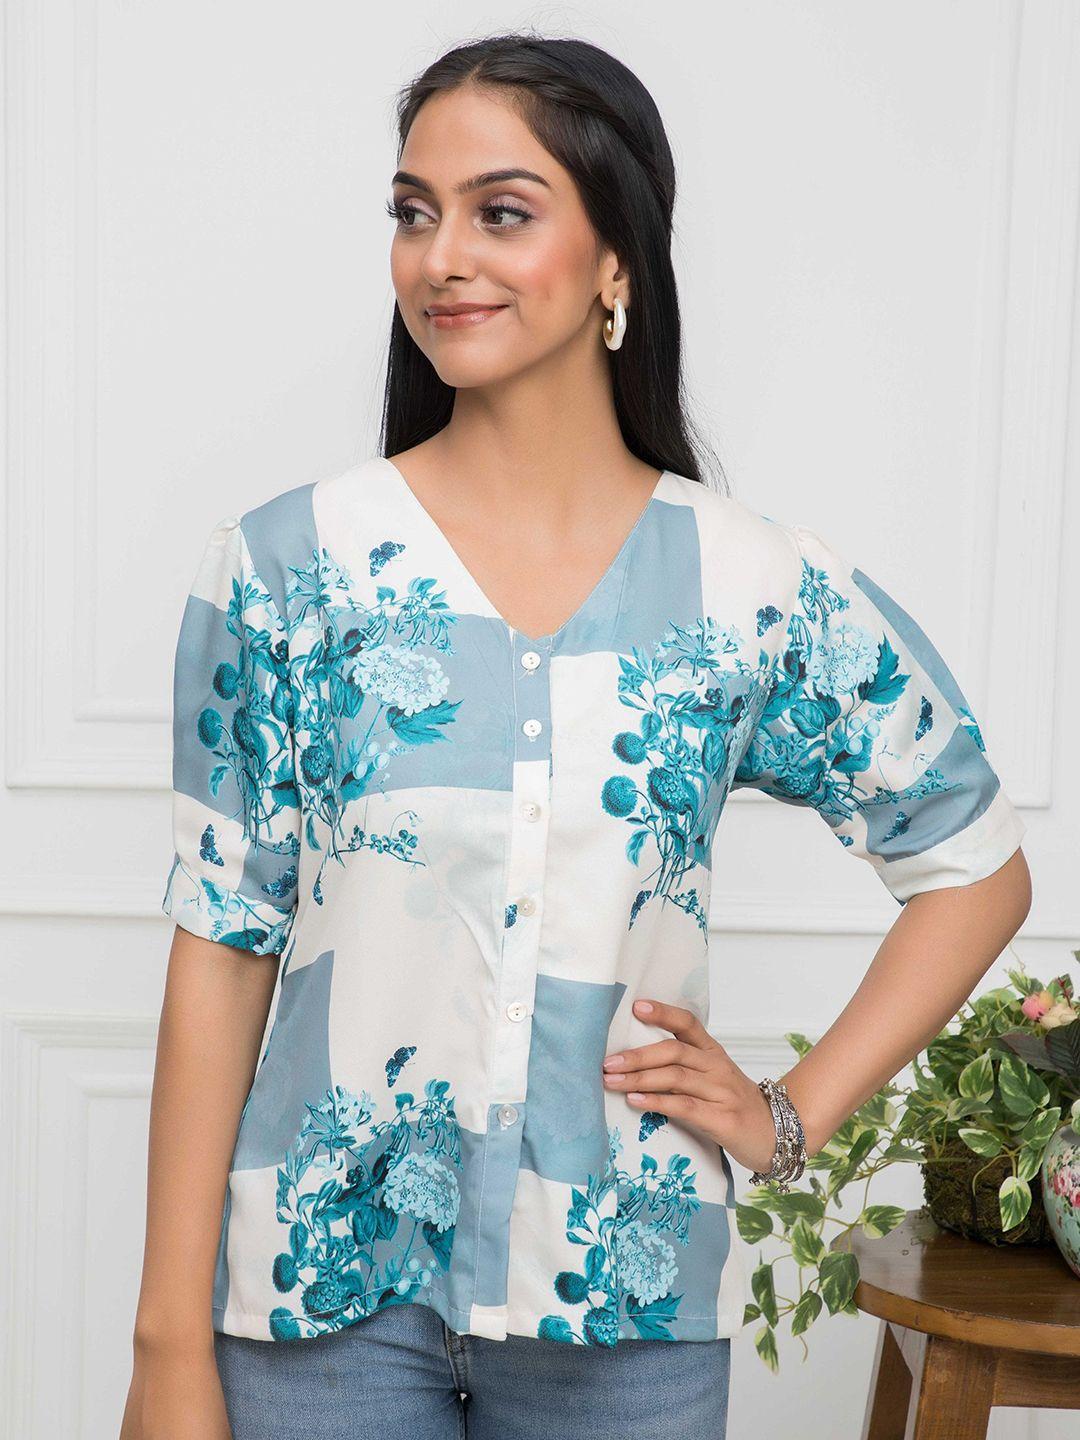 dressberry white floral printed v-neck shirt style top